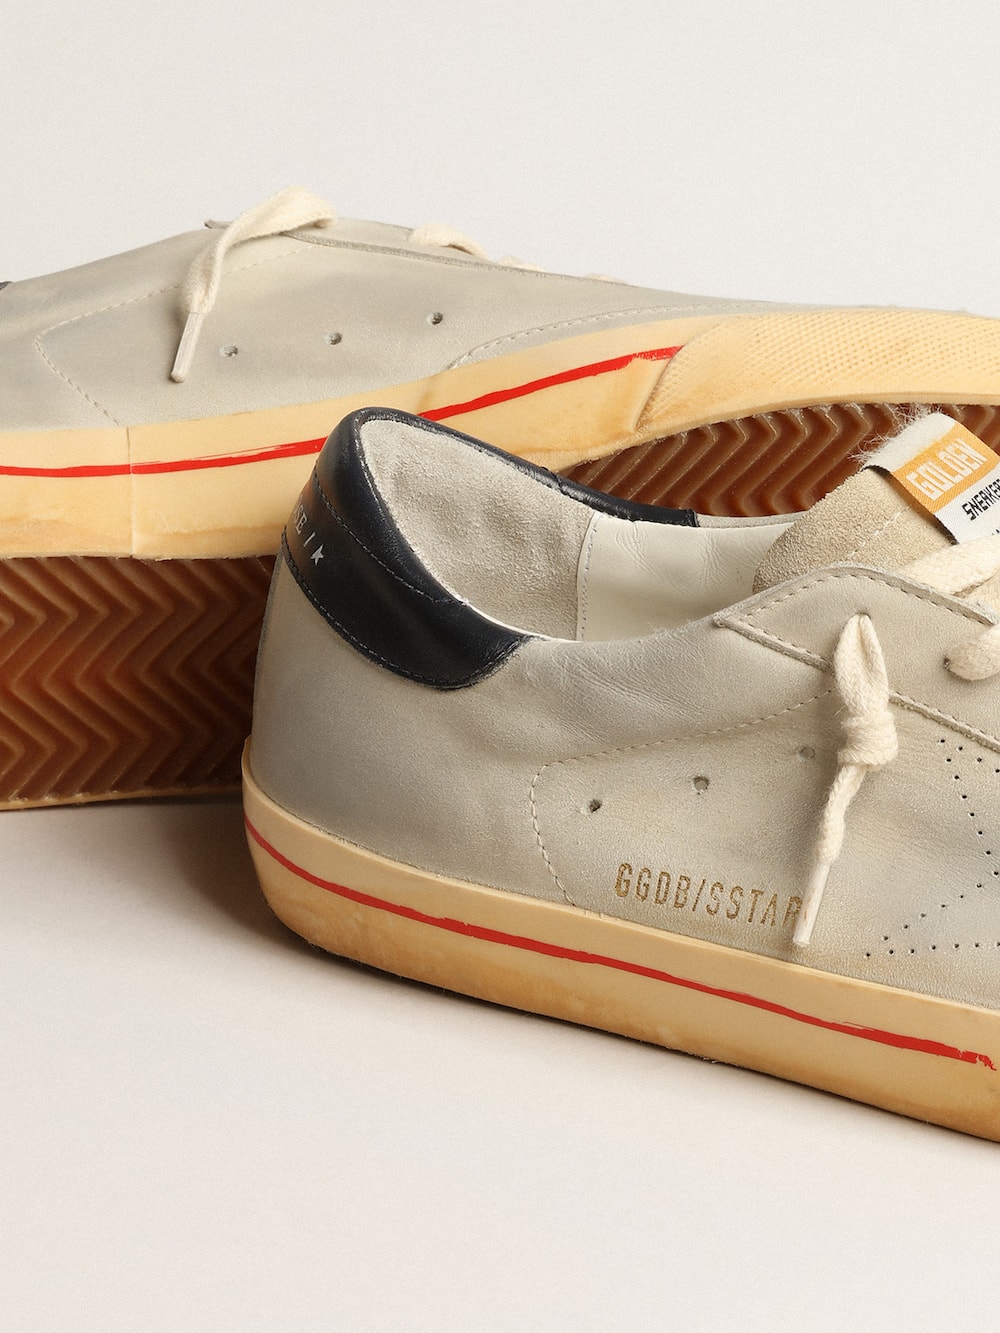 Golden Goose - Super-Star in gray nubuck with perforated star and blue heel tab in 